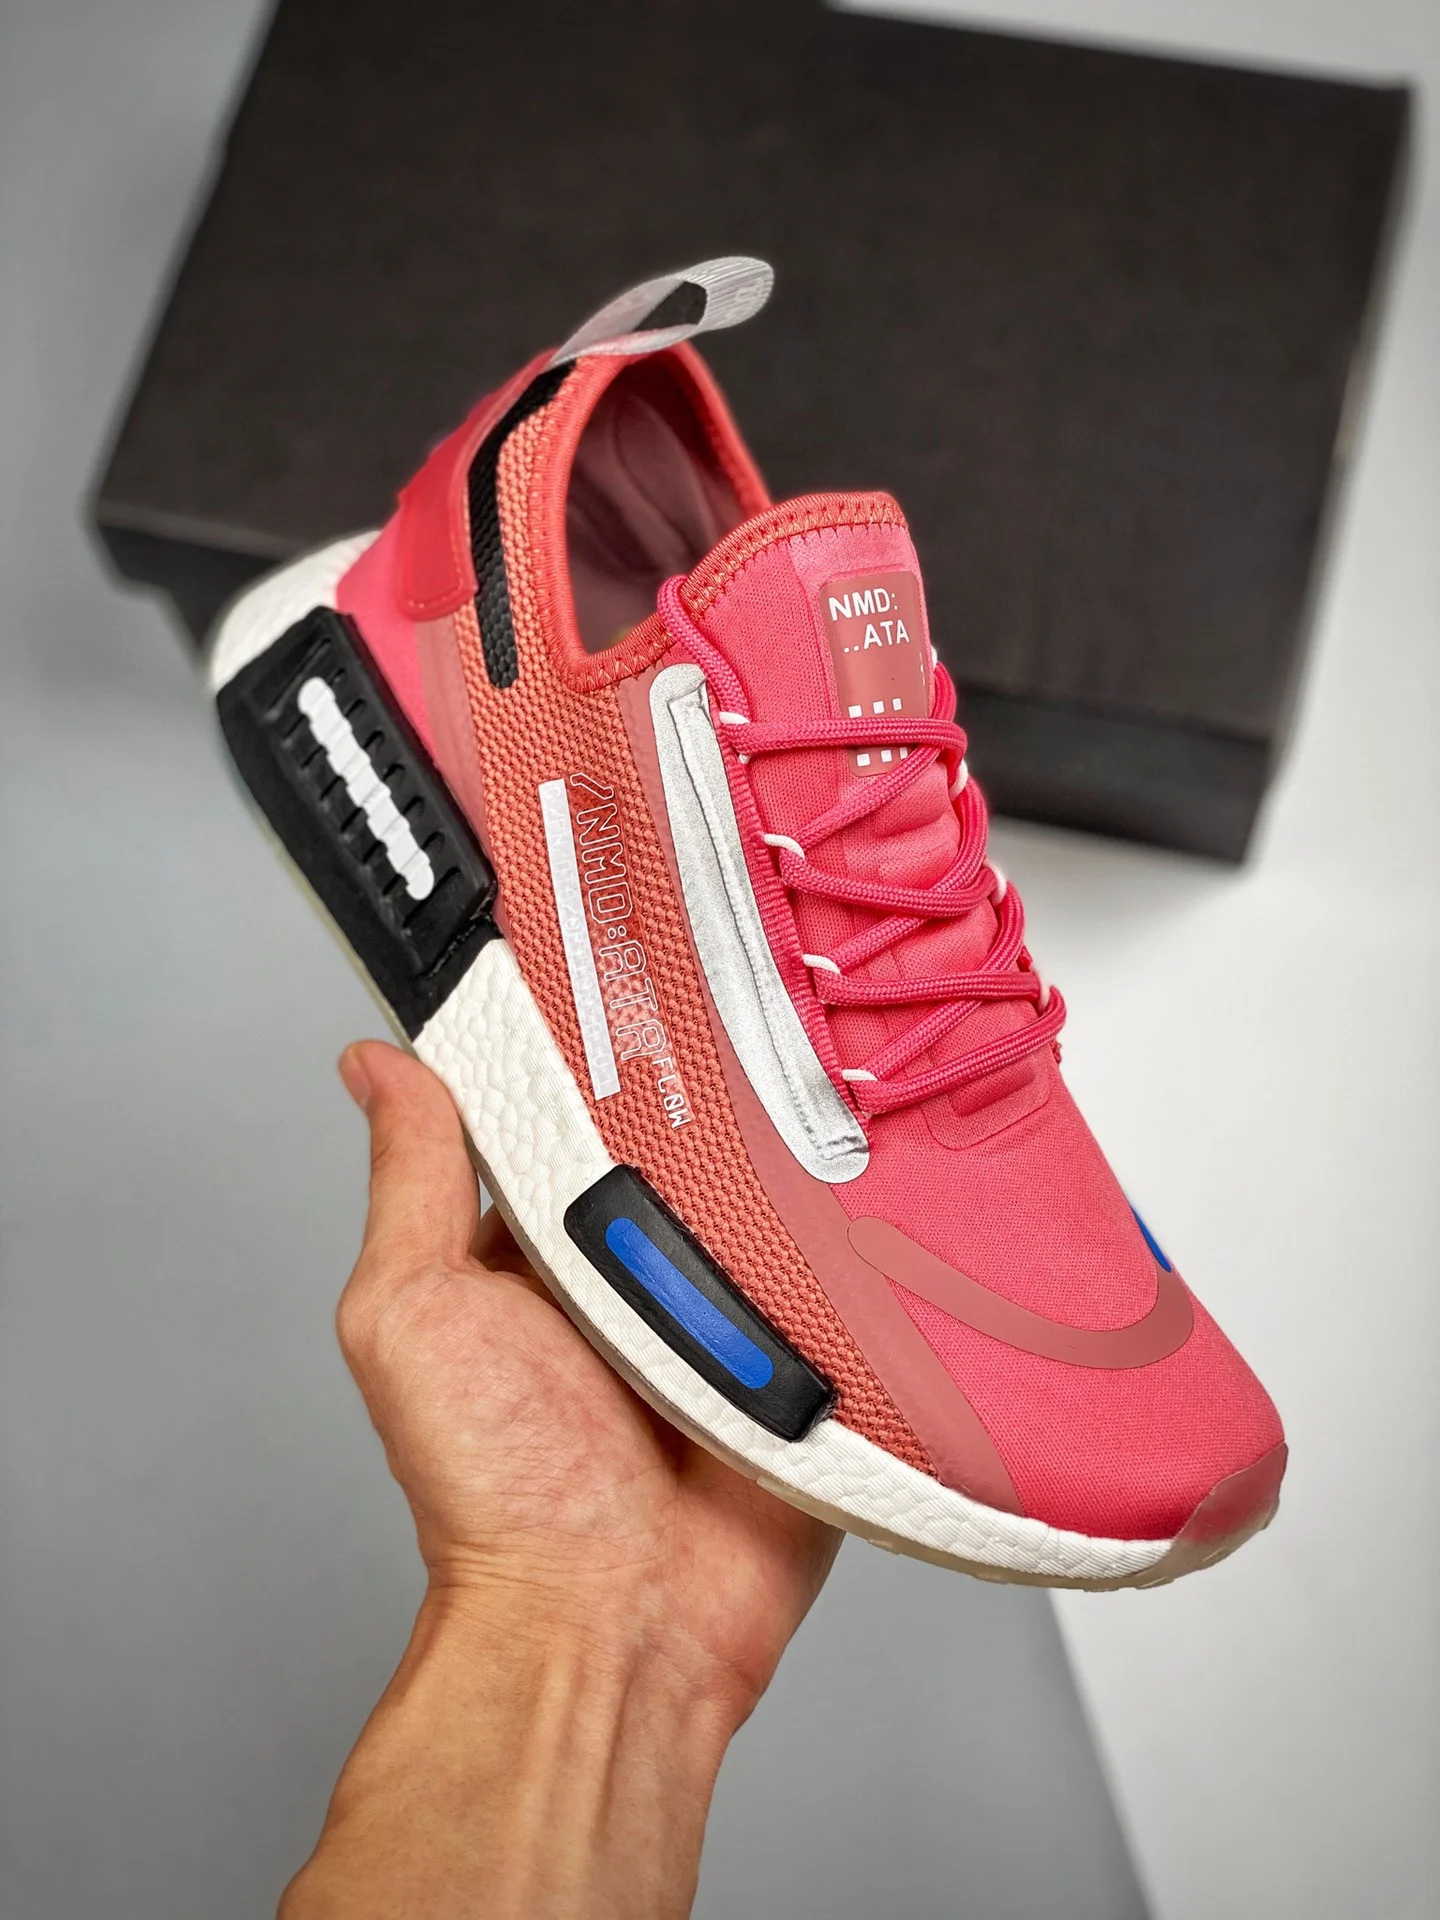 Adidas NMD R1 Spectoo Hazy Rose Core Black For Sale